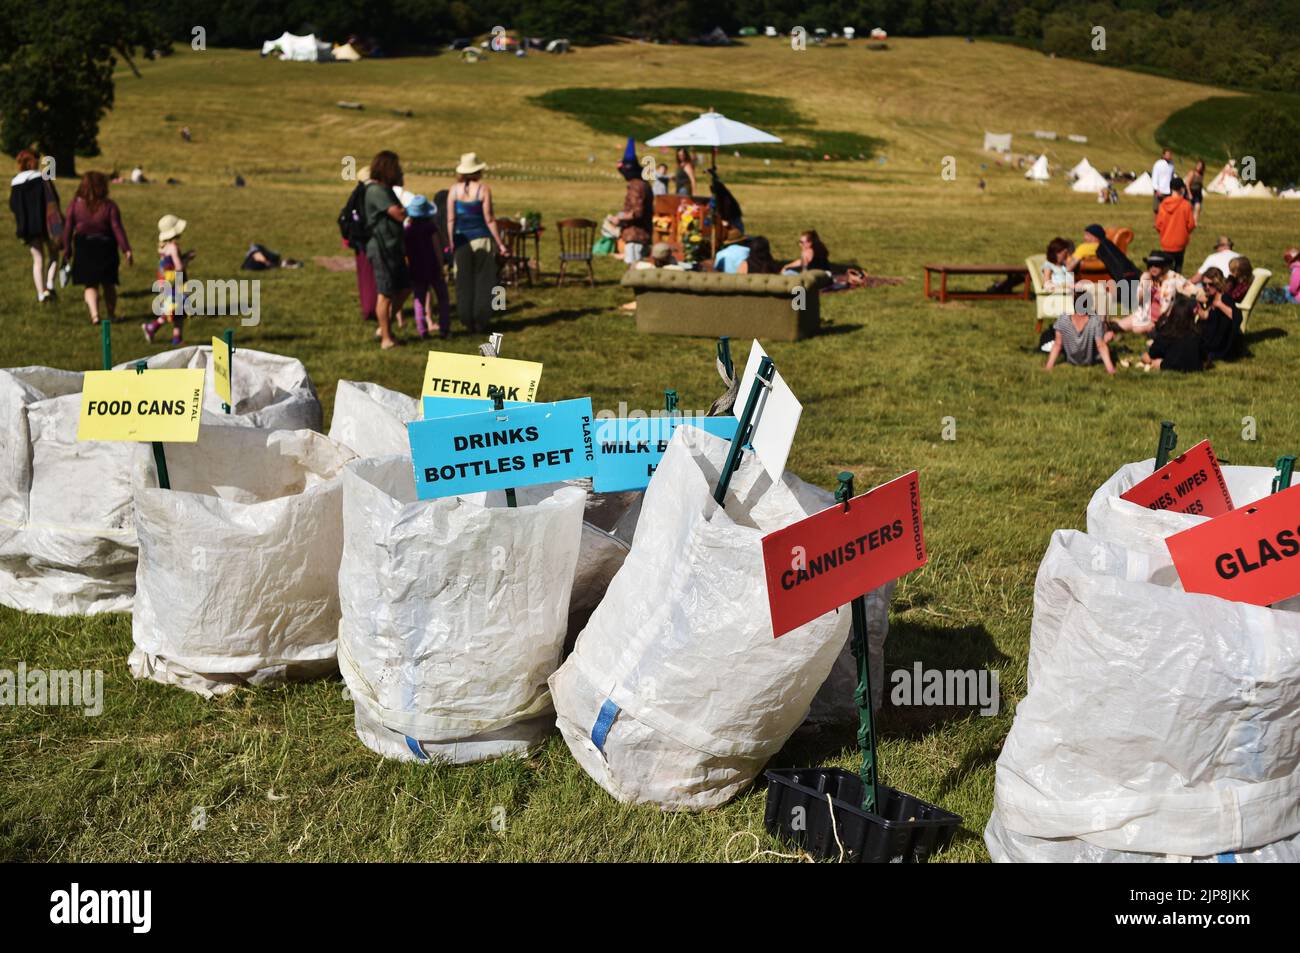 Recycling bags @ The Green Gathering Festival 2022. The festival that bills itself as the original off-grid festival.  Piercefield Park, Chepstow UK 06 08 2022 Stock Photo